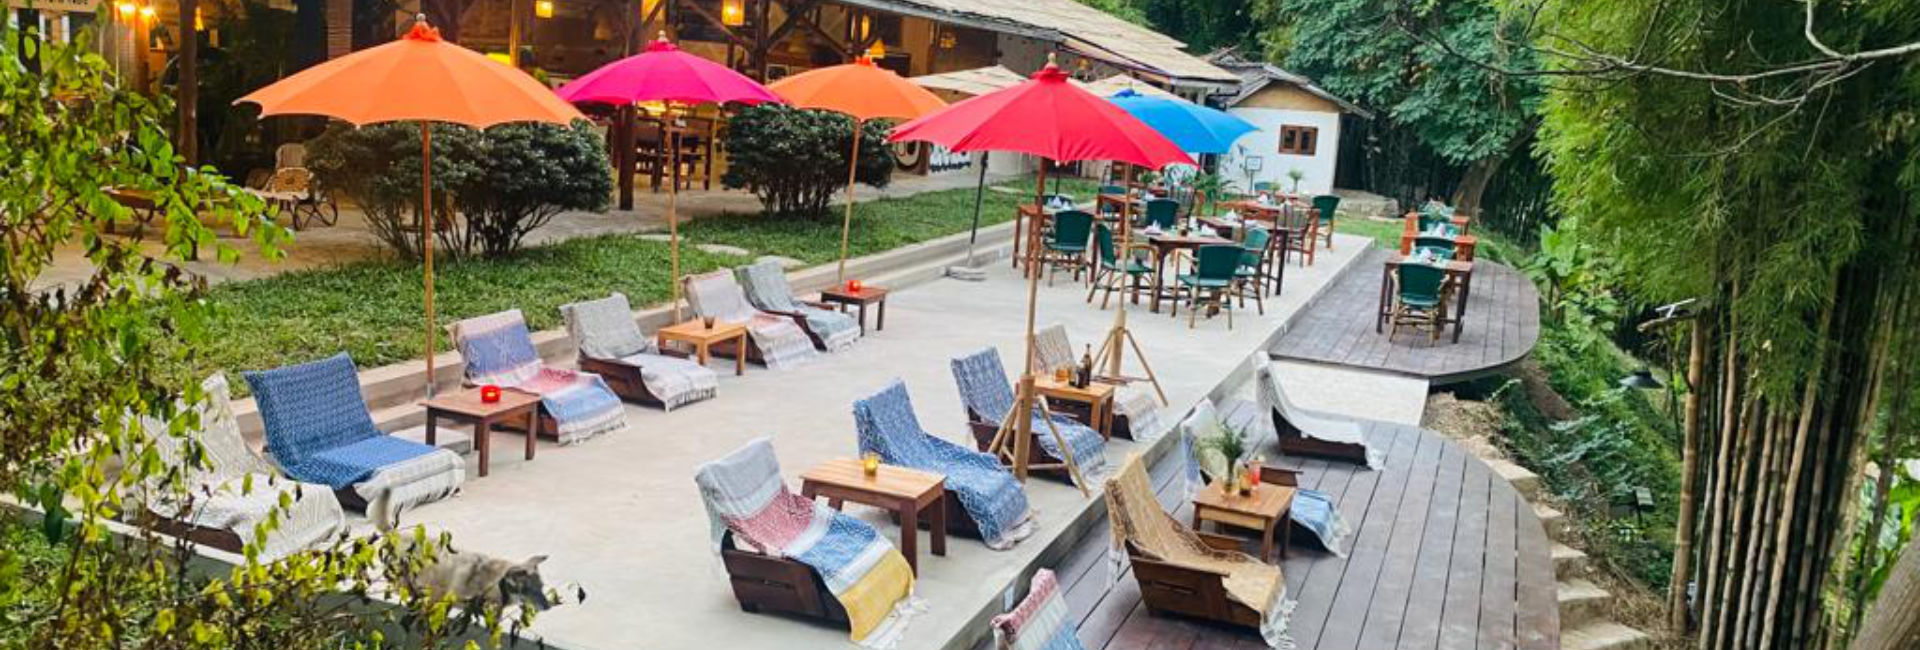 A restaurant in Luang Prabang with chairs and umbrellas on a wooden deck.